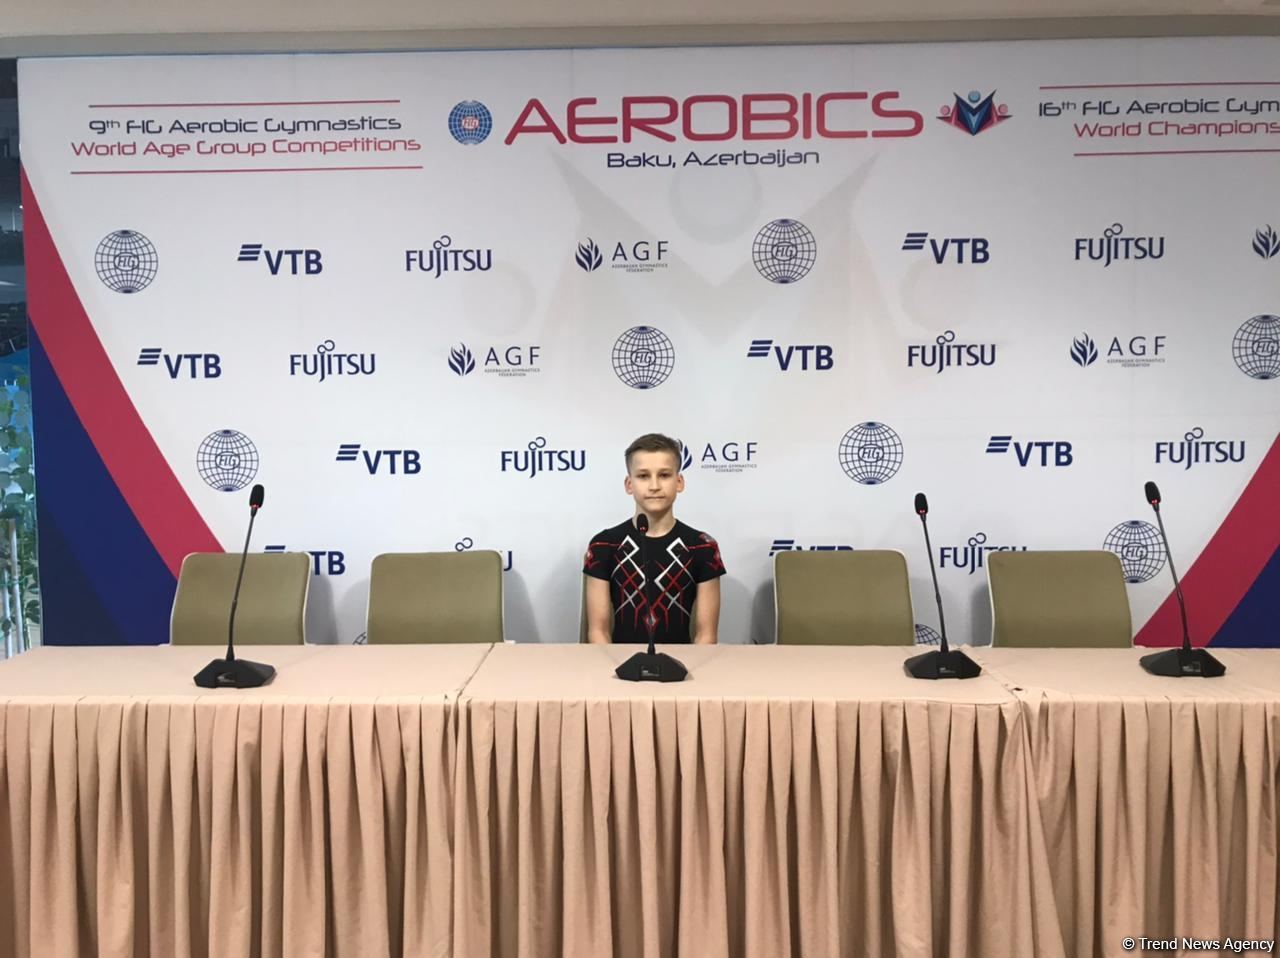 Honorable and responsible to perform at National Gymnastics Arena in Baku - Athlete from Lithuania